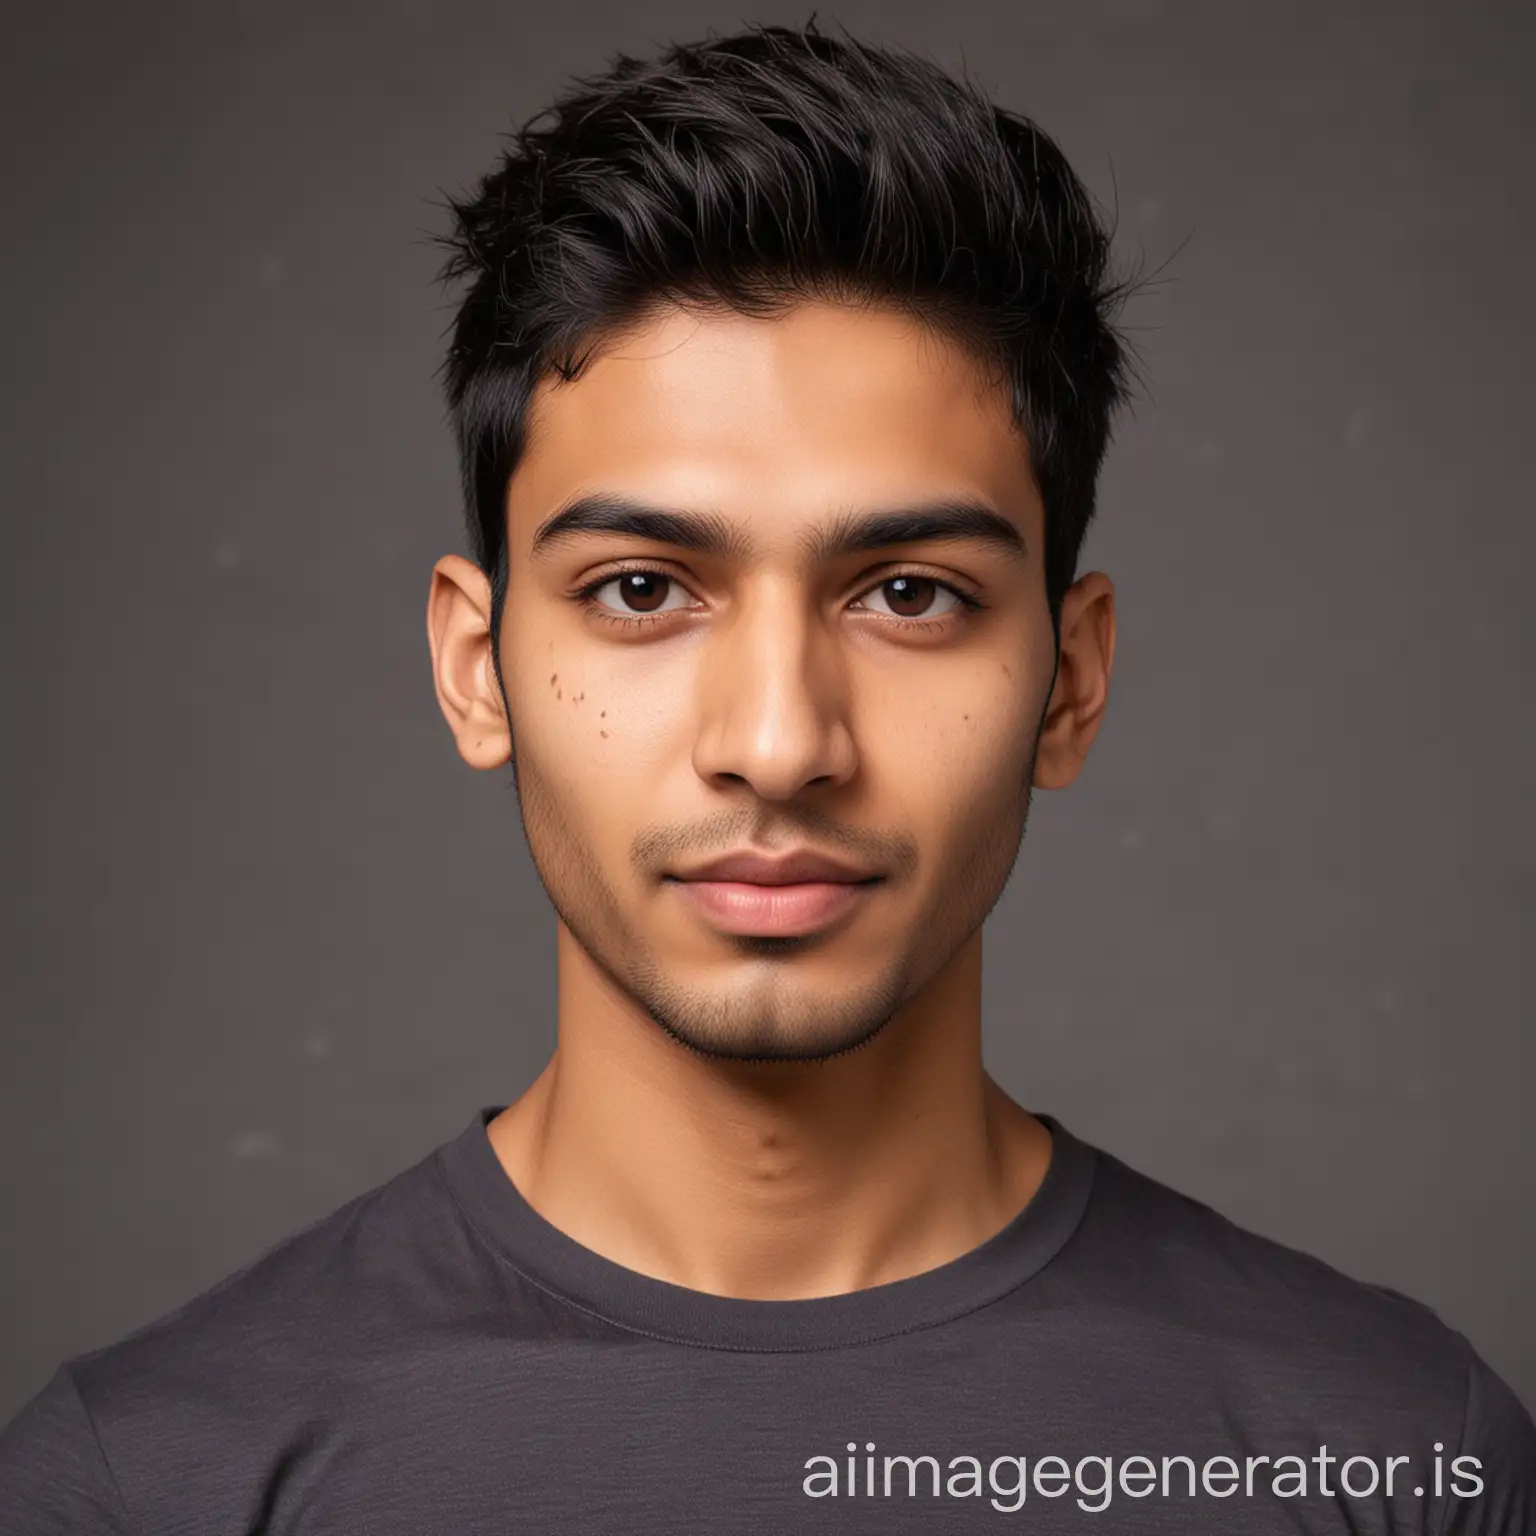 "27-year-old Indian male with light brown skin tone, slightly acne-scarred fair skin, and a skinny neck, posing for a LinkedIn profile picture in a professional manner, wearing a well-fitted t-shirt and sporting a one-side cropped hairstyle."